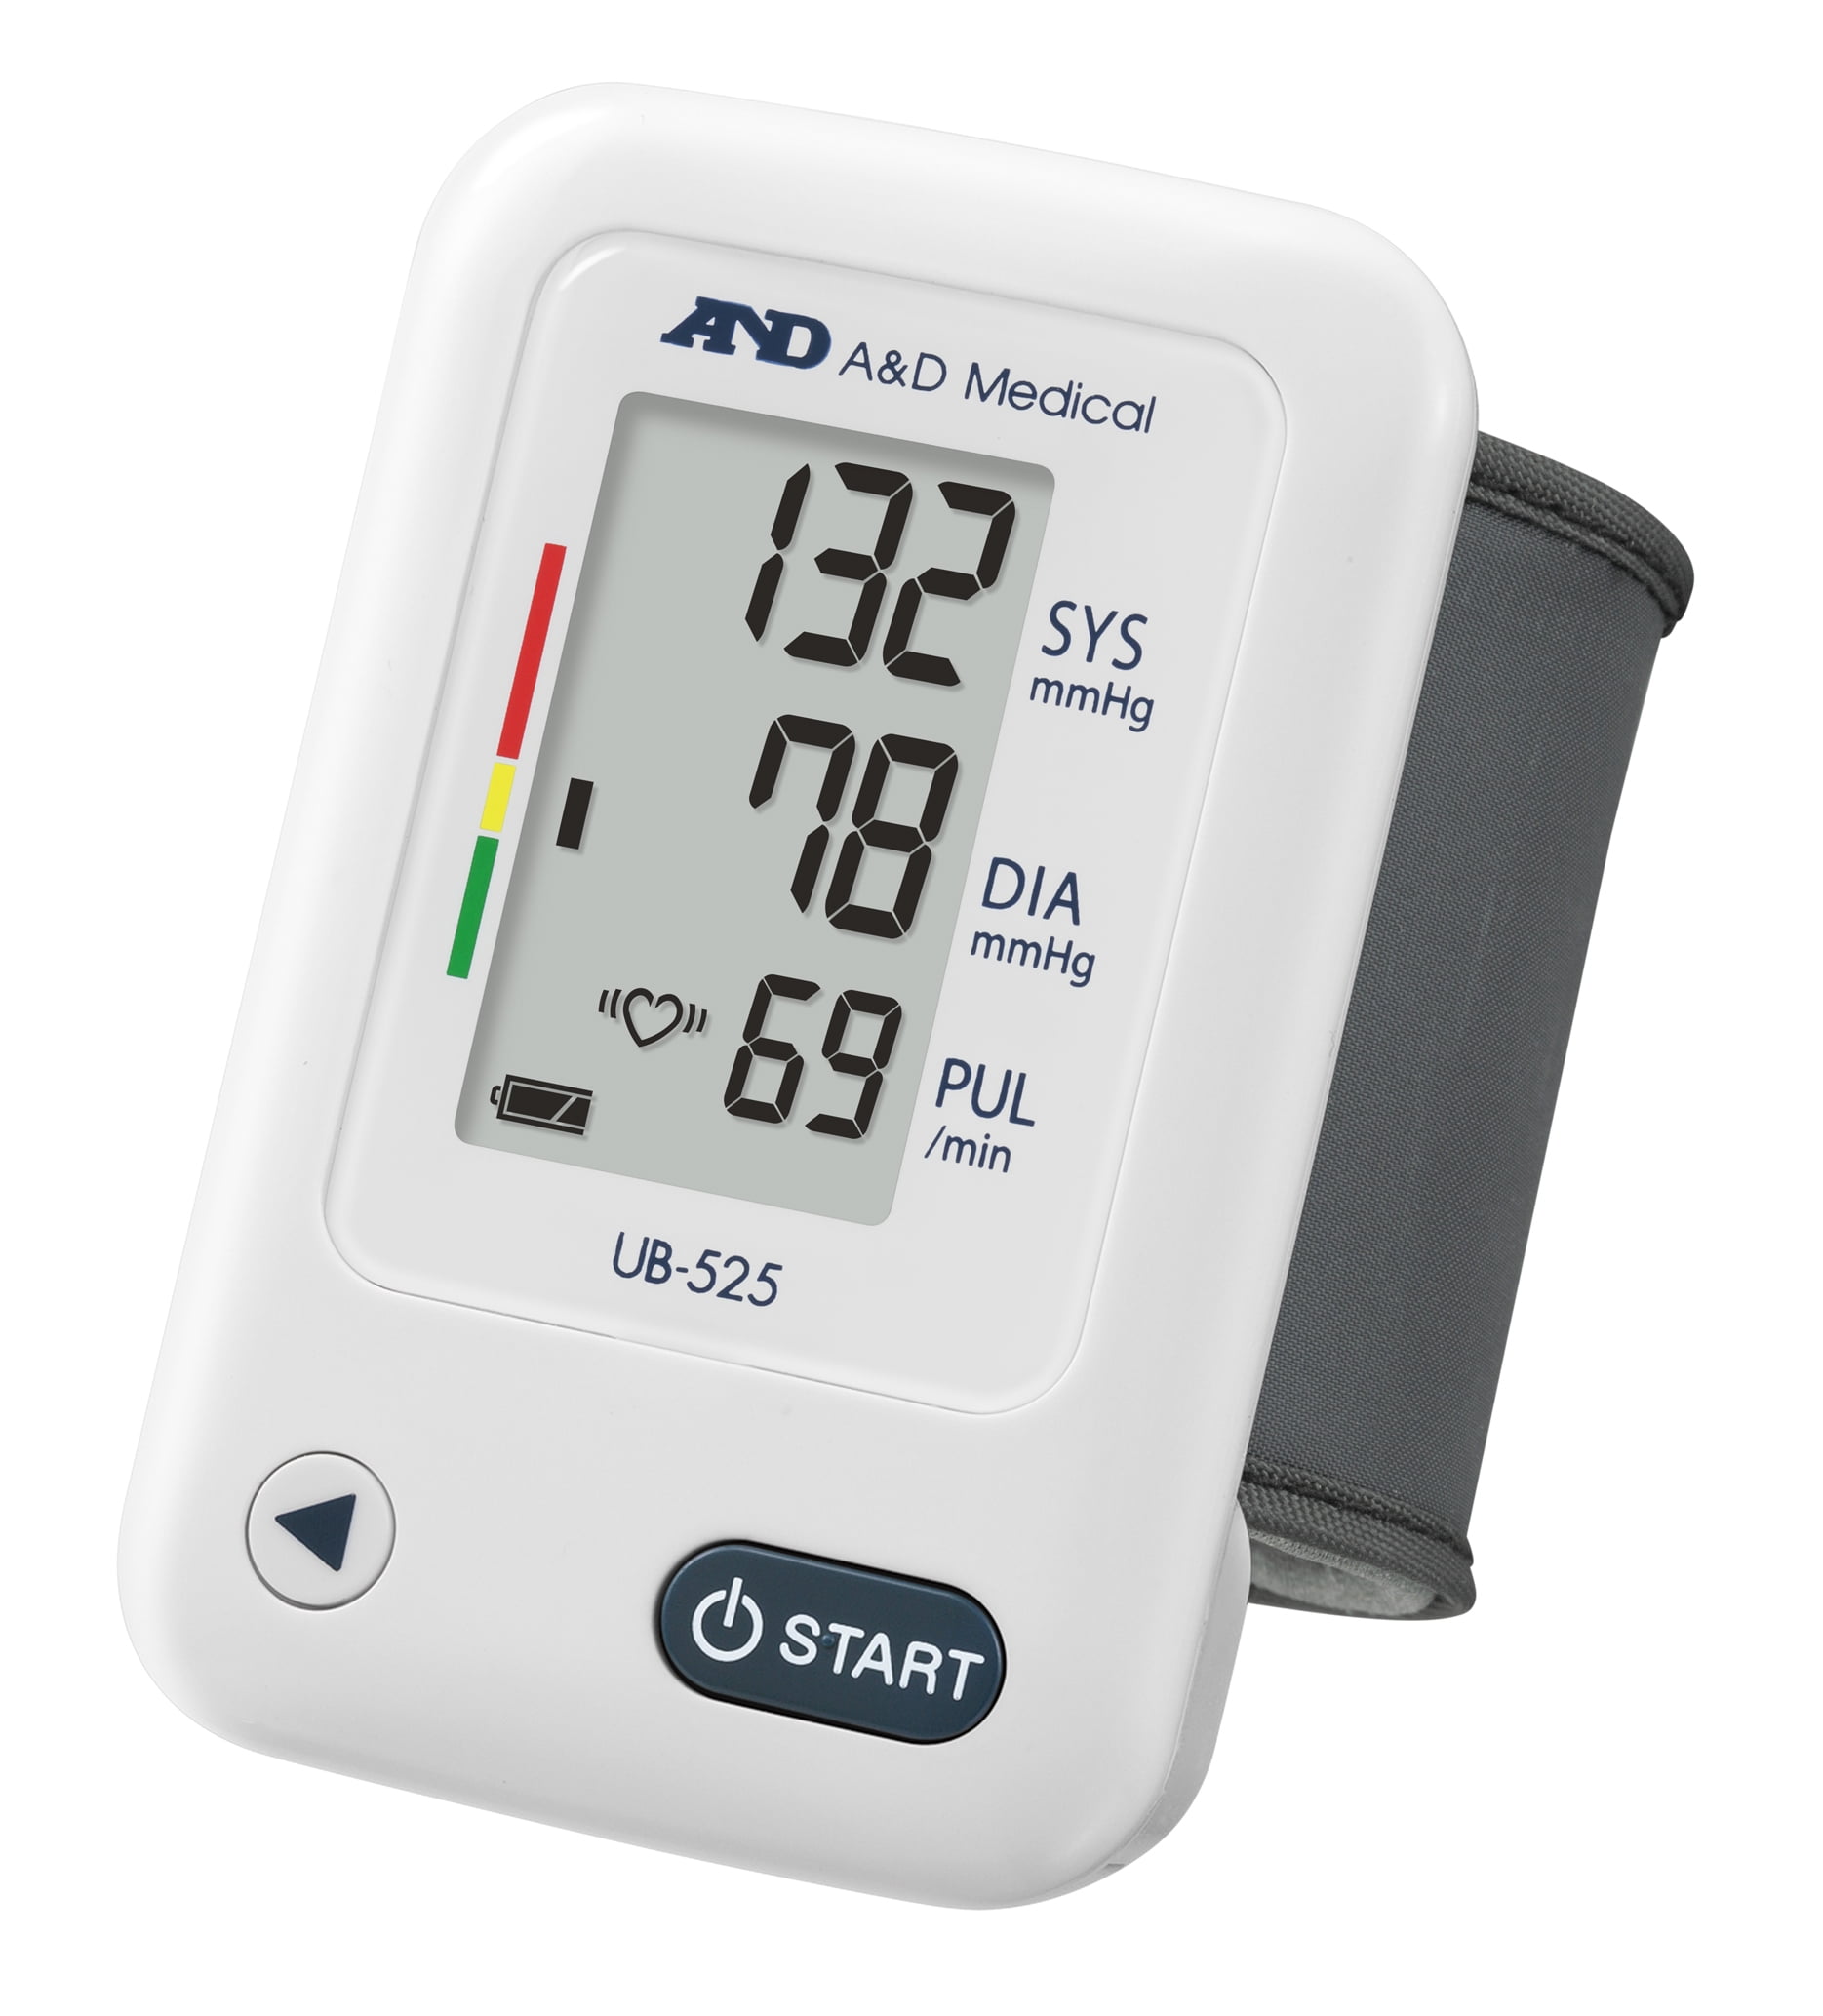 Picture of A&D Medical UB-525 Essential Wrist Blood Pressure Monitor